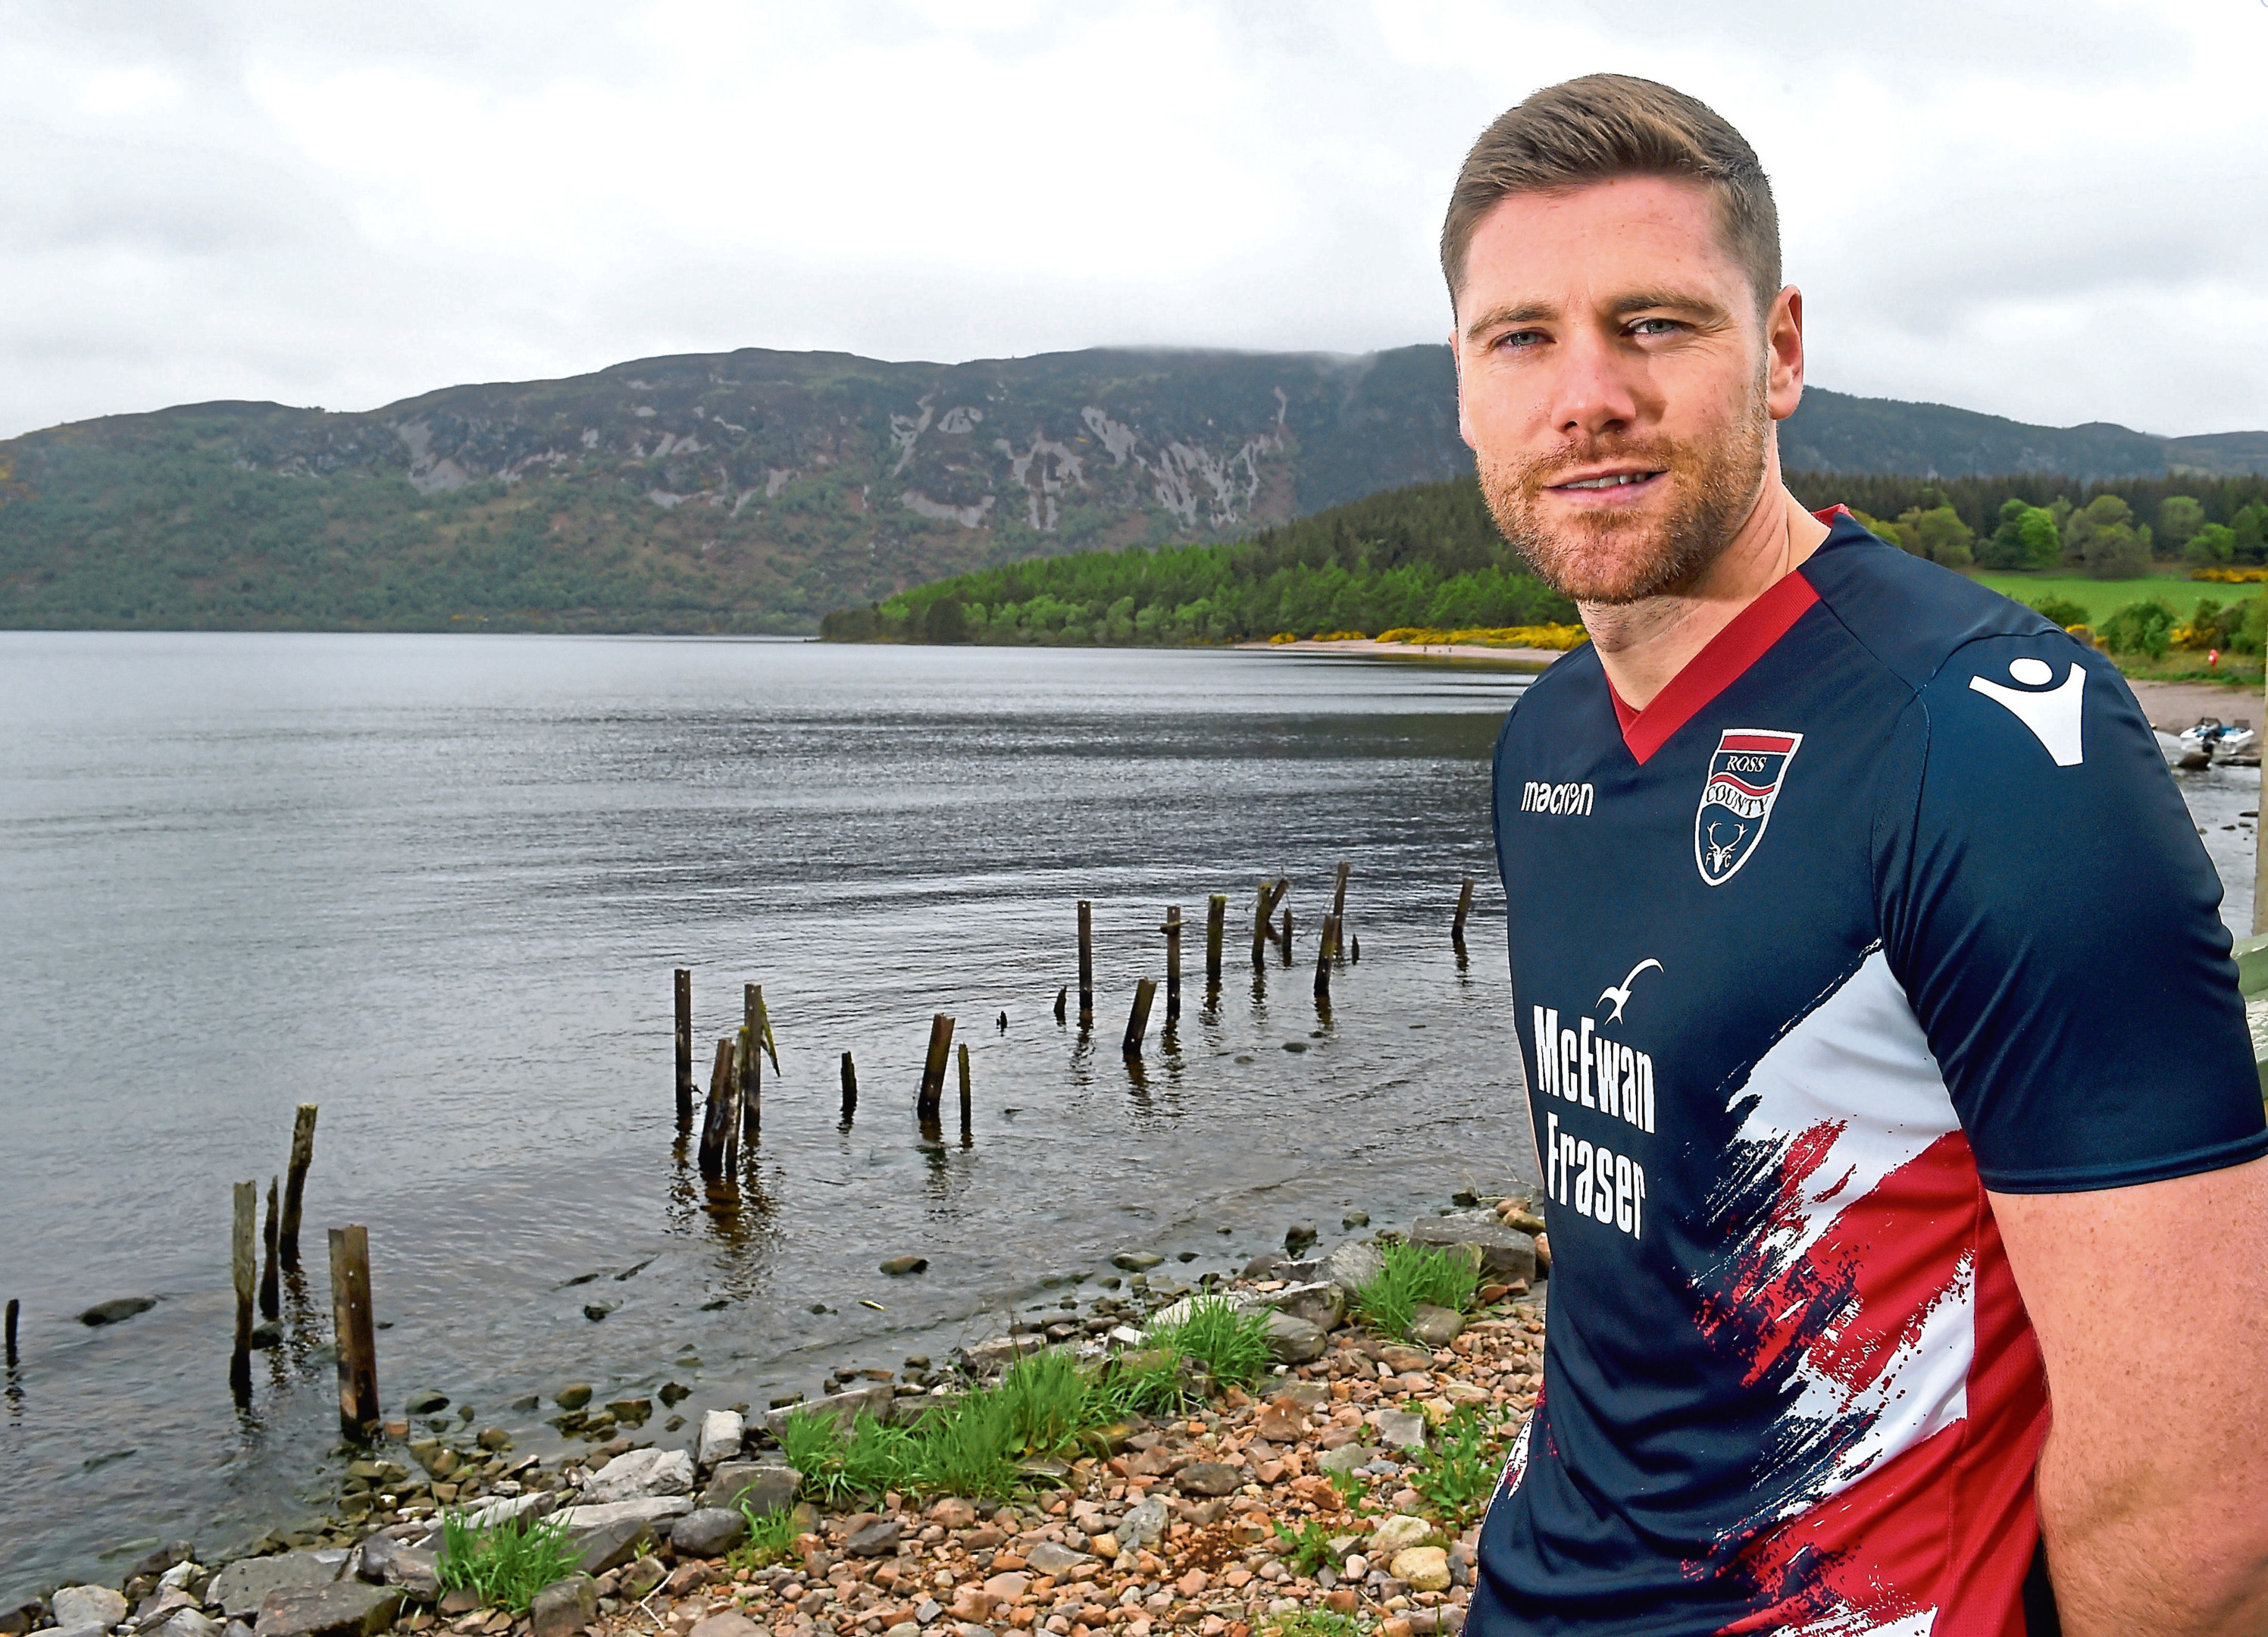 Ross County yesterday launched on the shores of Loch Ness their new strip for the forthcoming season.
Picture by Sandy McCook.